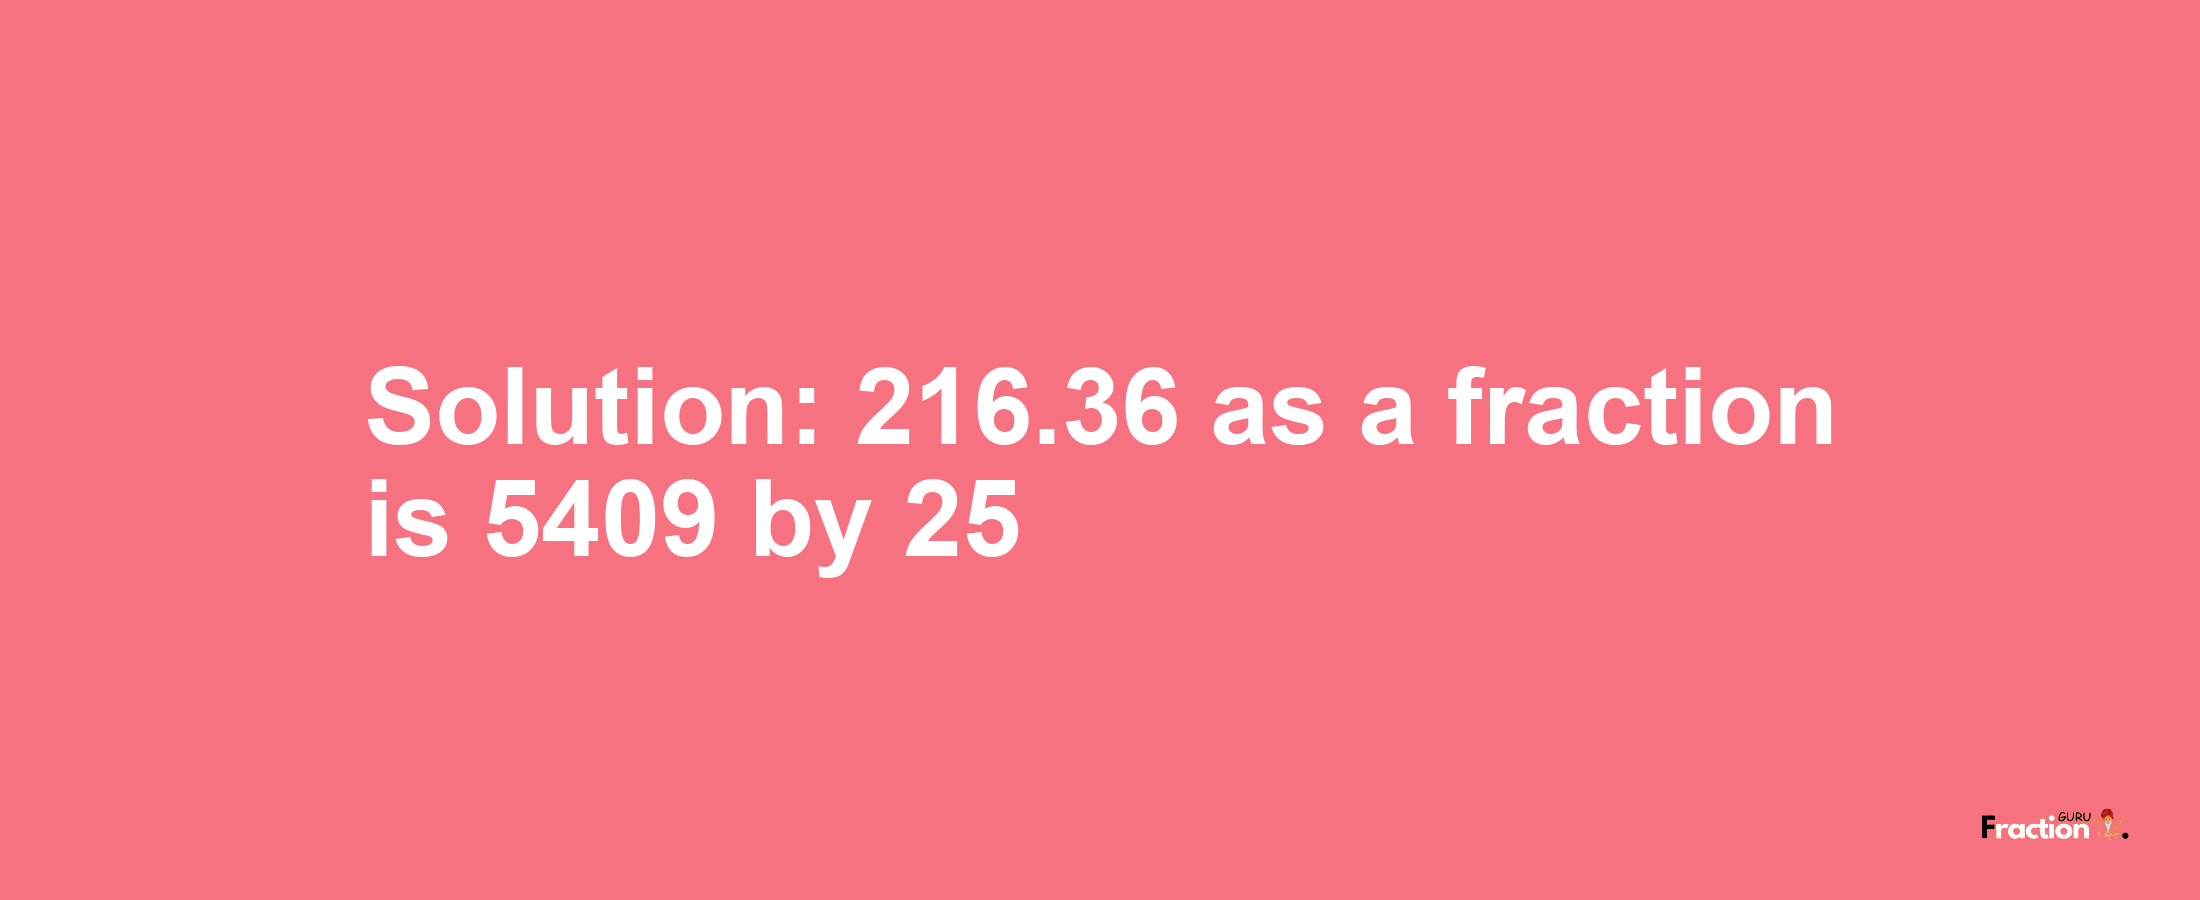 Solution:216.36 as a fraction is 5409/25